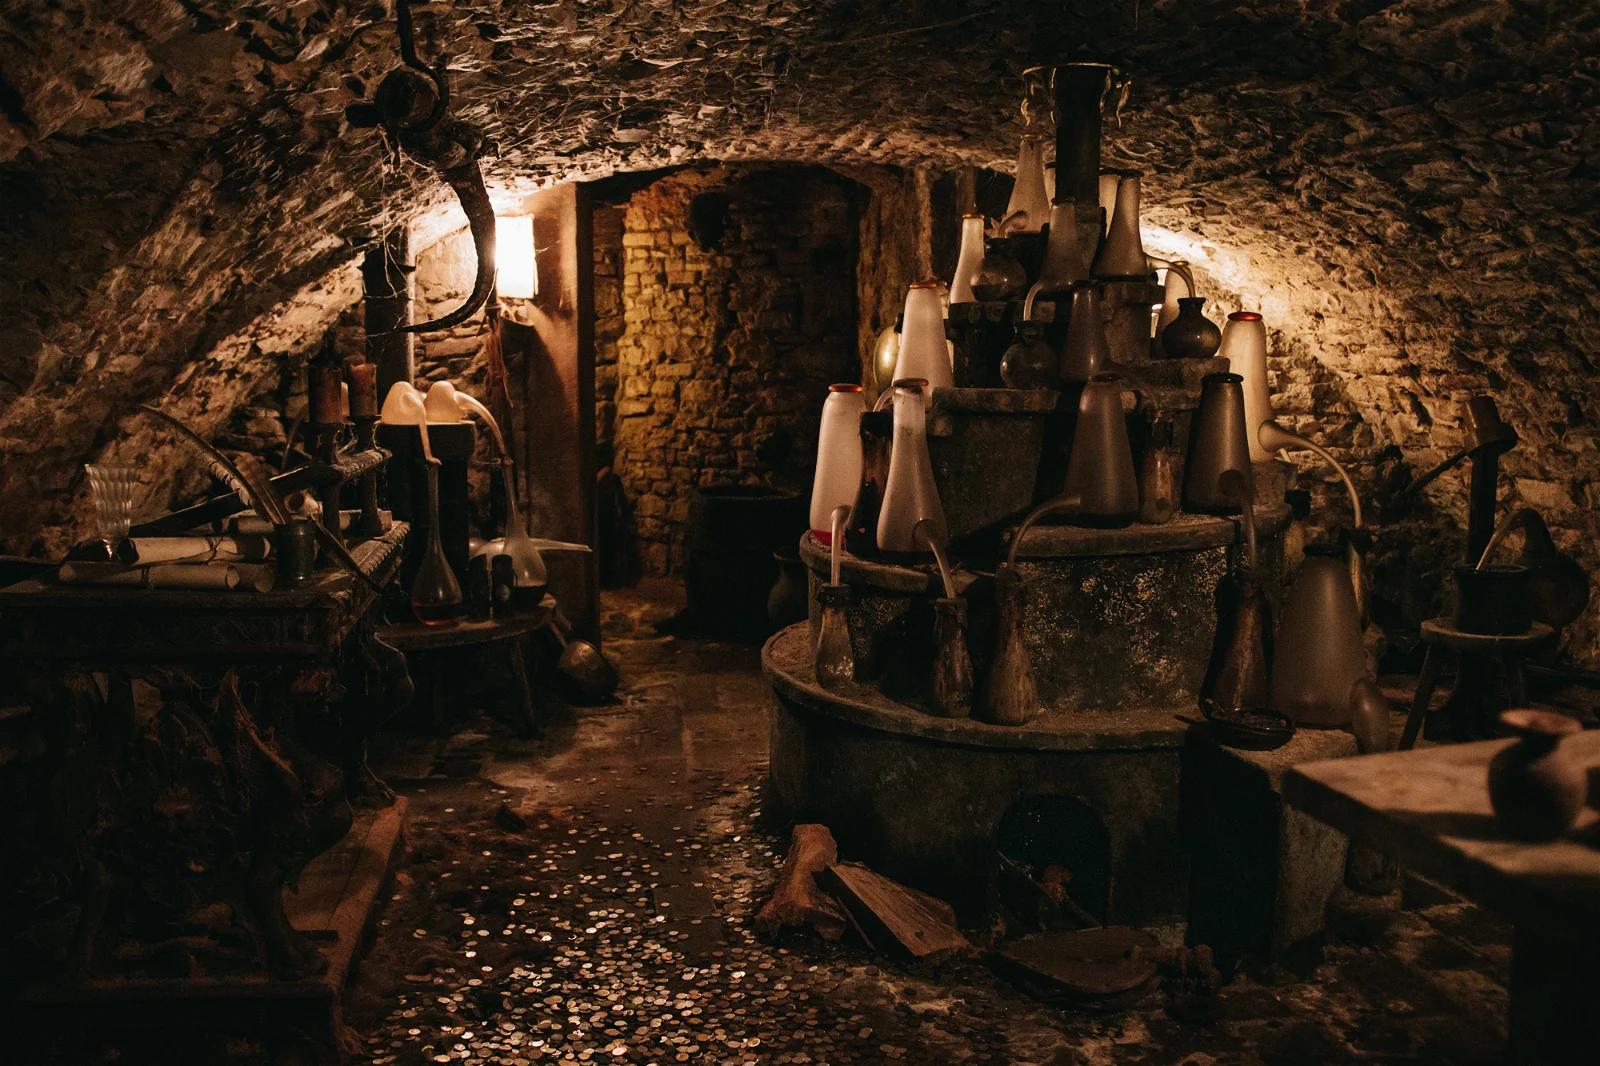 A photo inside a candlelit stone room filled with medieval equipment, creating a rustic and historical ambiance.
